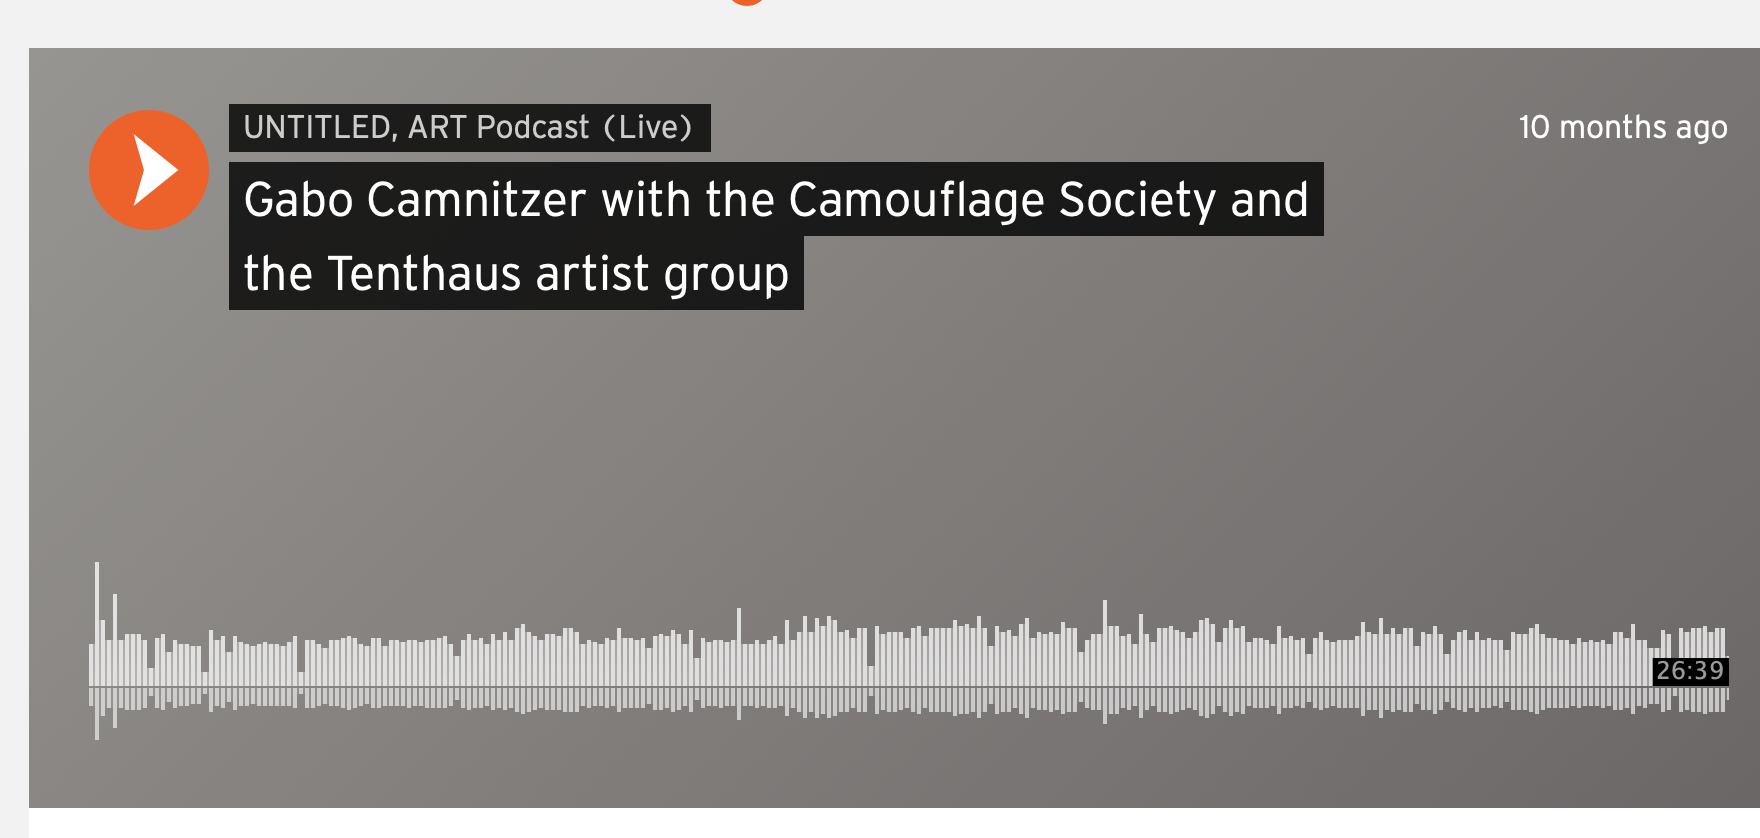  https://soundcloud.com/untitledartpodcastlive/gabo-camnitzer-with-the-camouflage-society-and-the-tenthaus-artist-group 